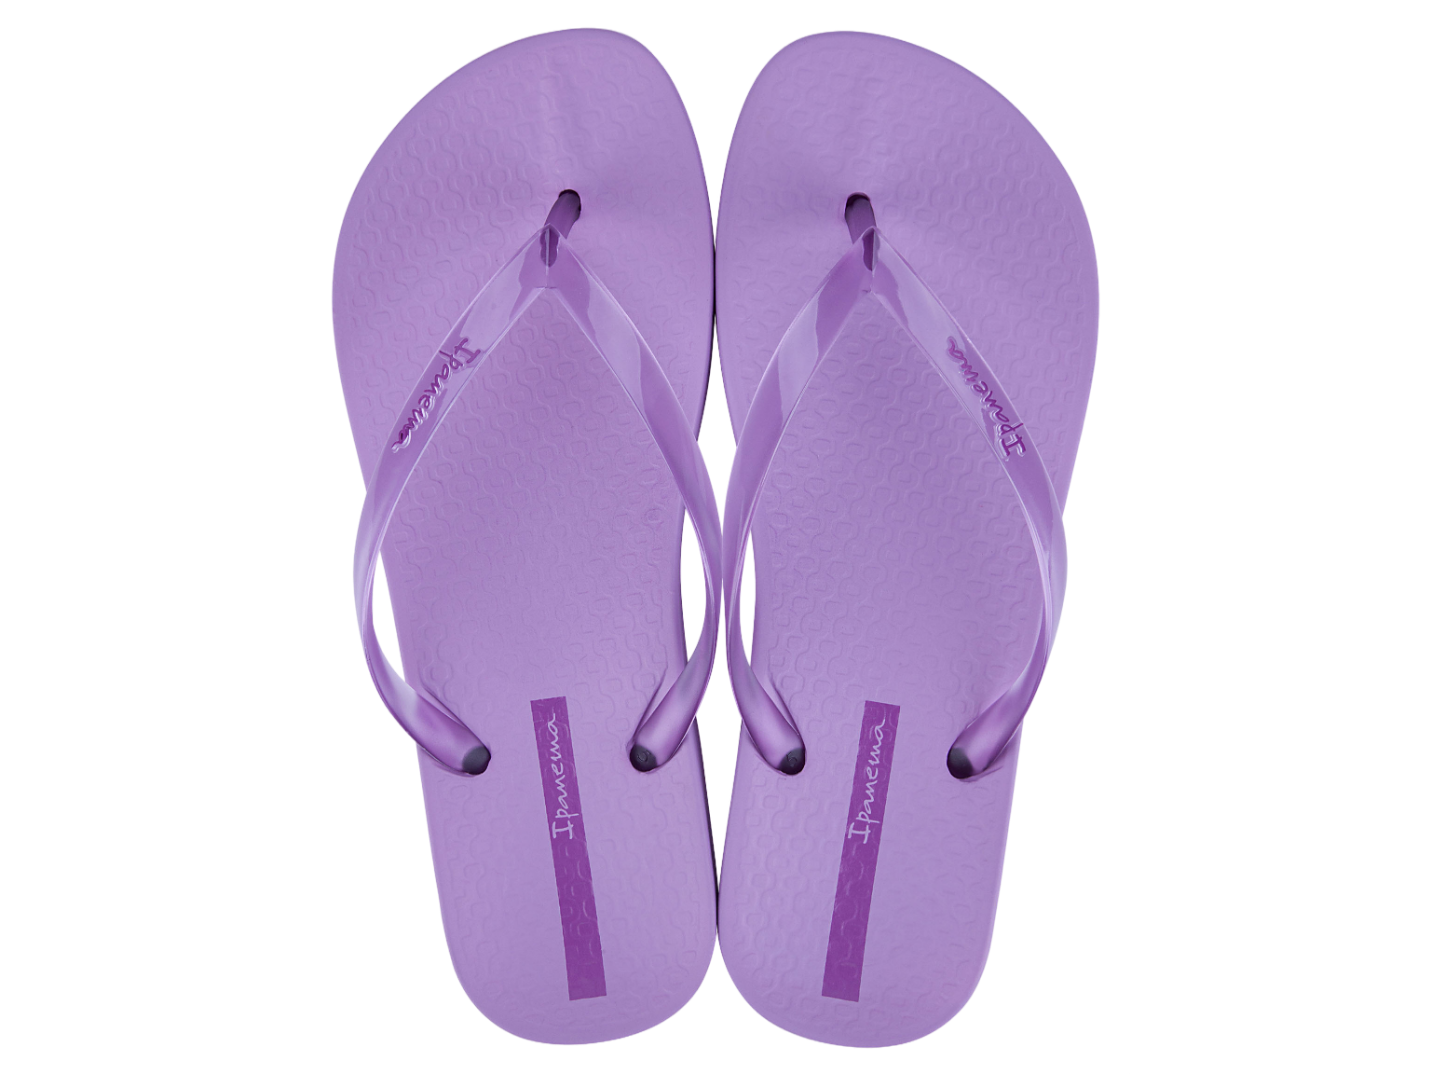 Ipanema Anatomic Connect Slippers Dames - Lilac - Maat 41/42